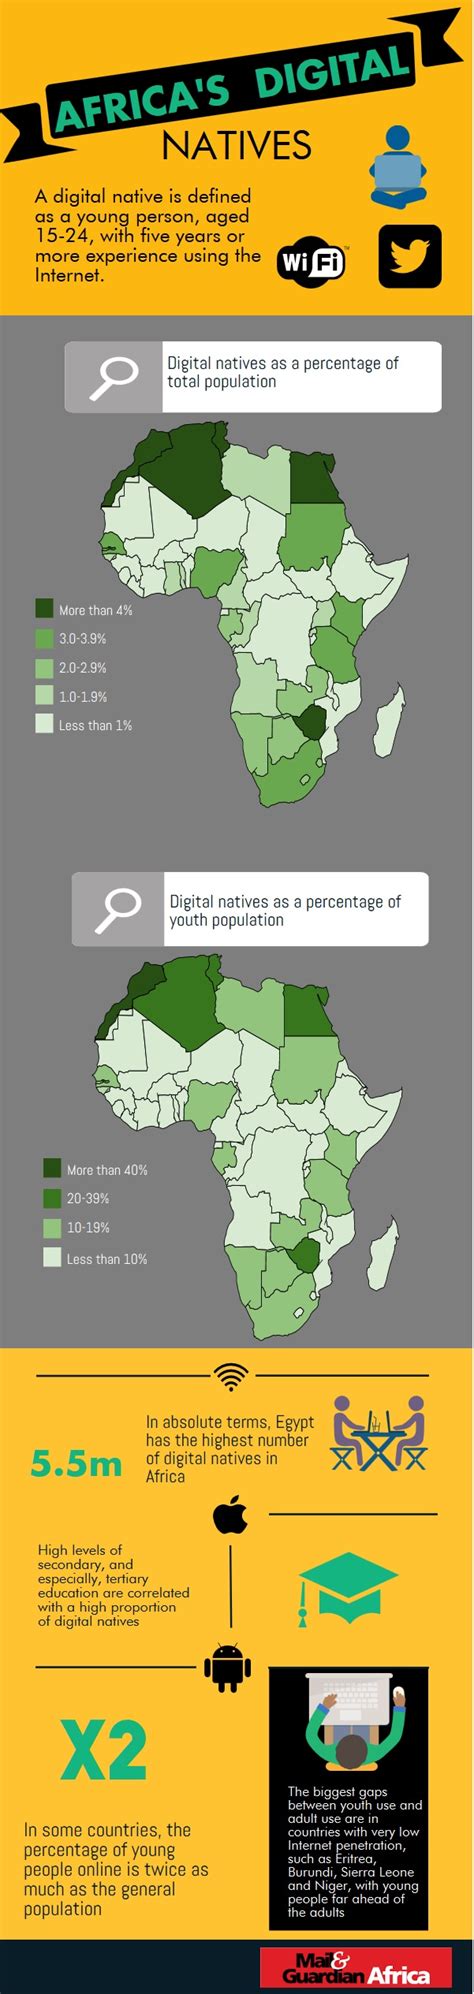 Meet The Digital Natives Trailblazing Internet Use In Africa 6 Facts